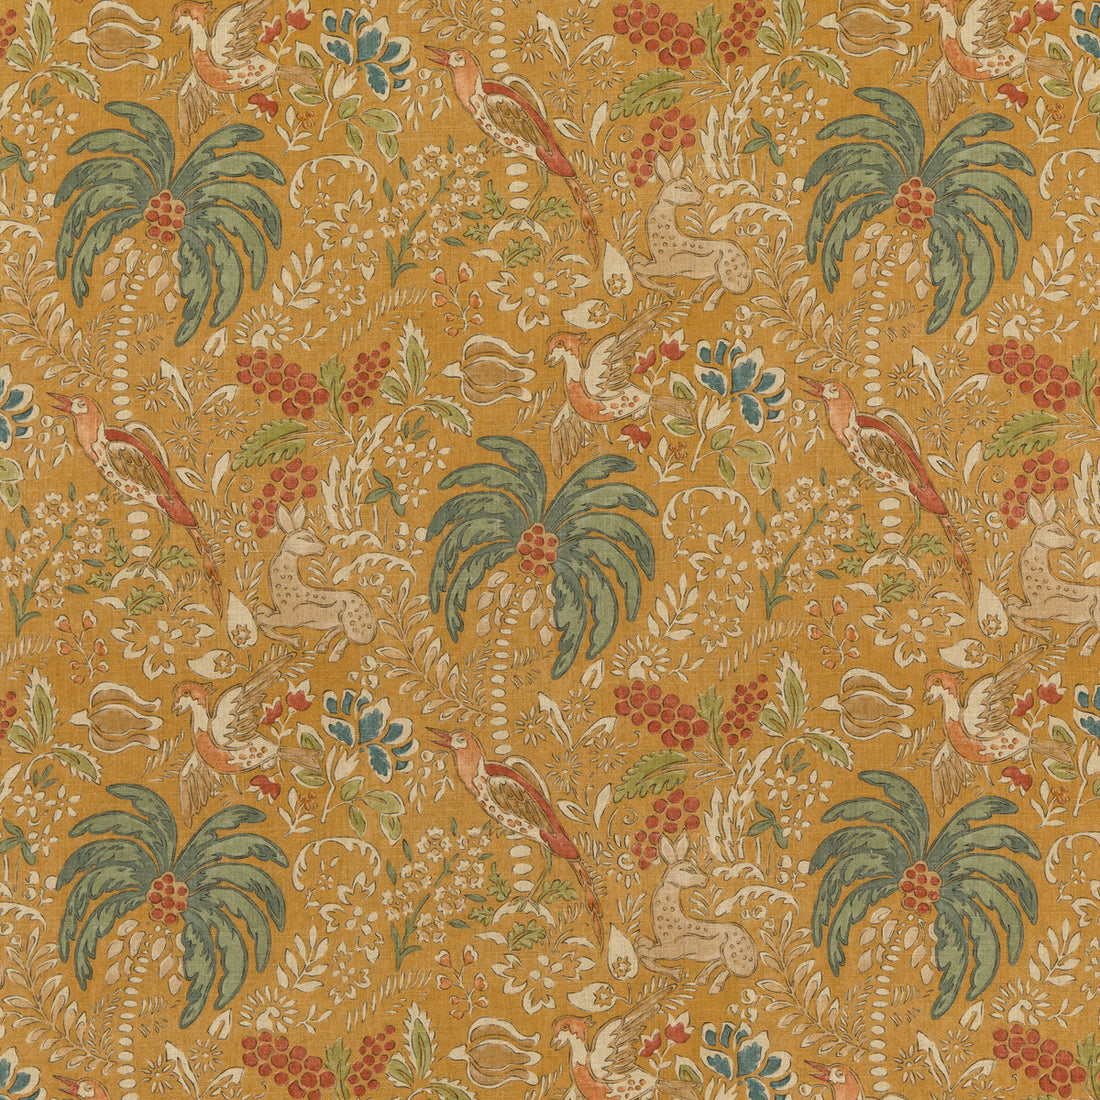 Fantasia fabric in spice color - pattern FD308.T30.0 - by Mulberry in the Modern Country I collection